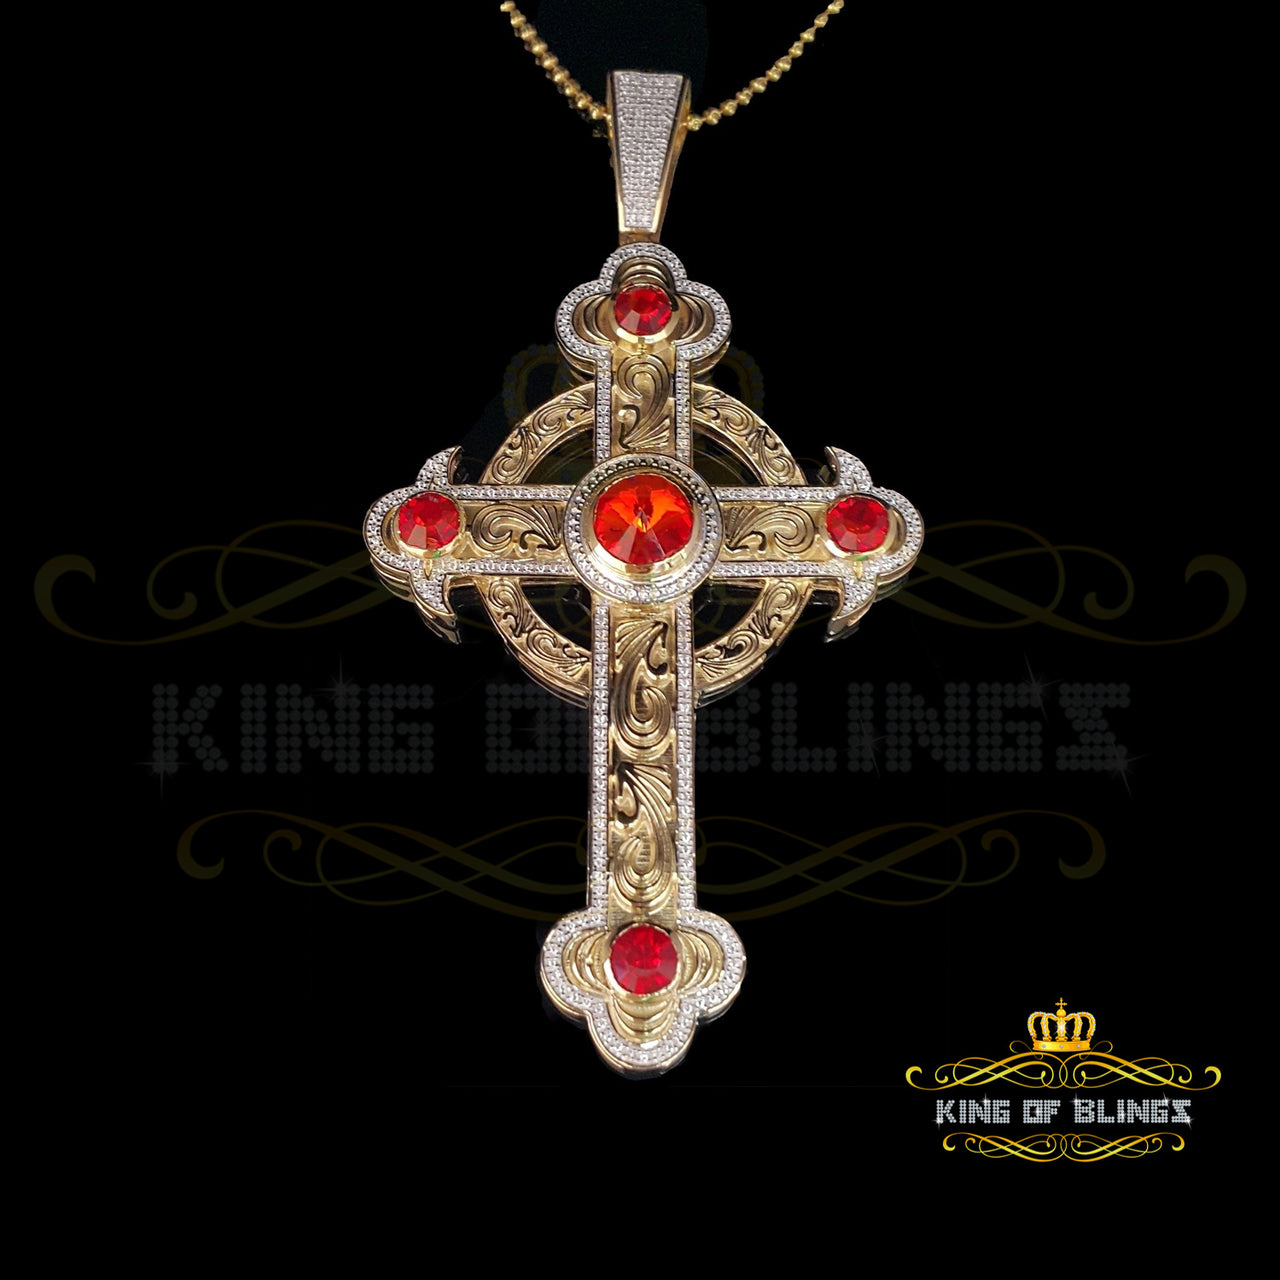 Beautiful Fancy Yellow CROSS Sterling Silver Pendant with 10.38ct Cubic Zirconia KING OF BLINGS